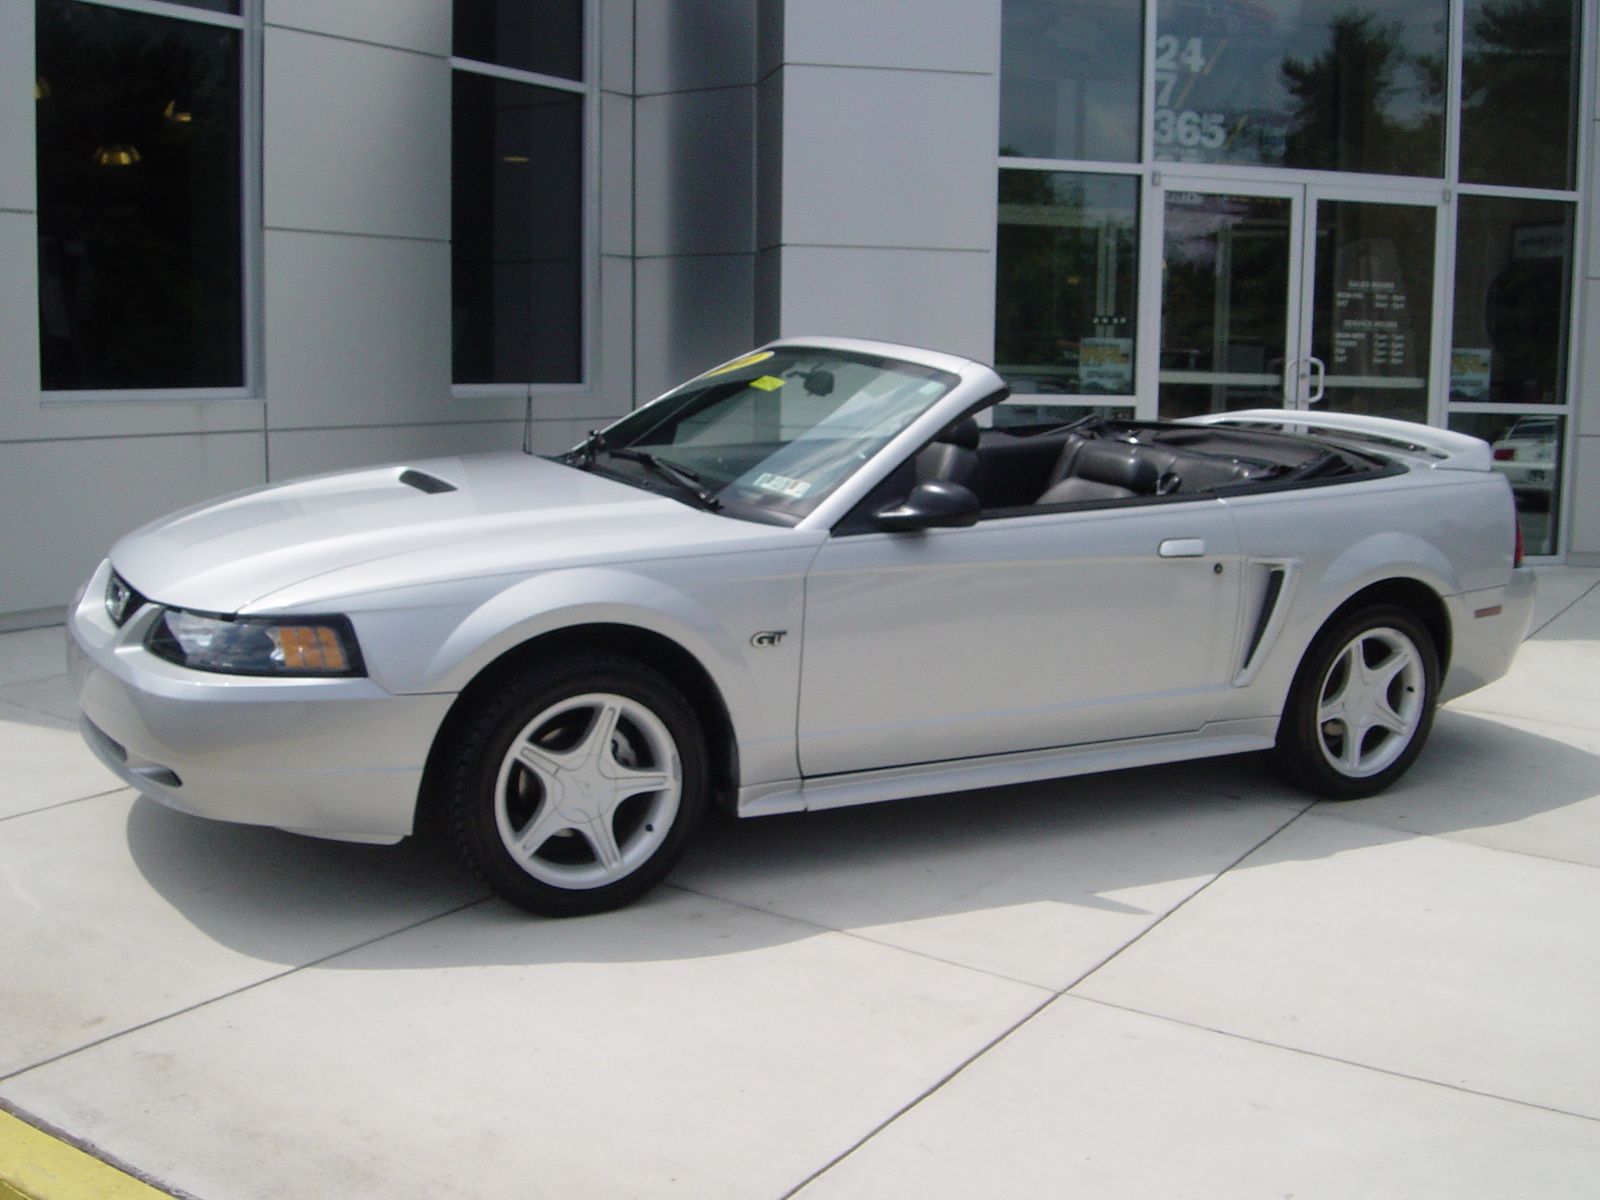 2000 Ford mustang gt convertible weight #1